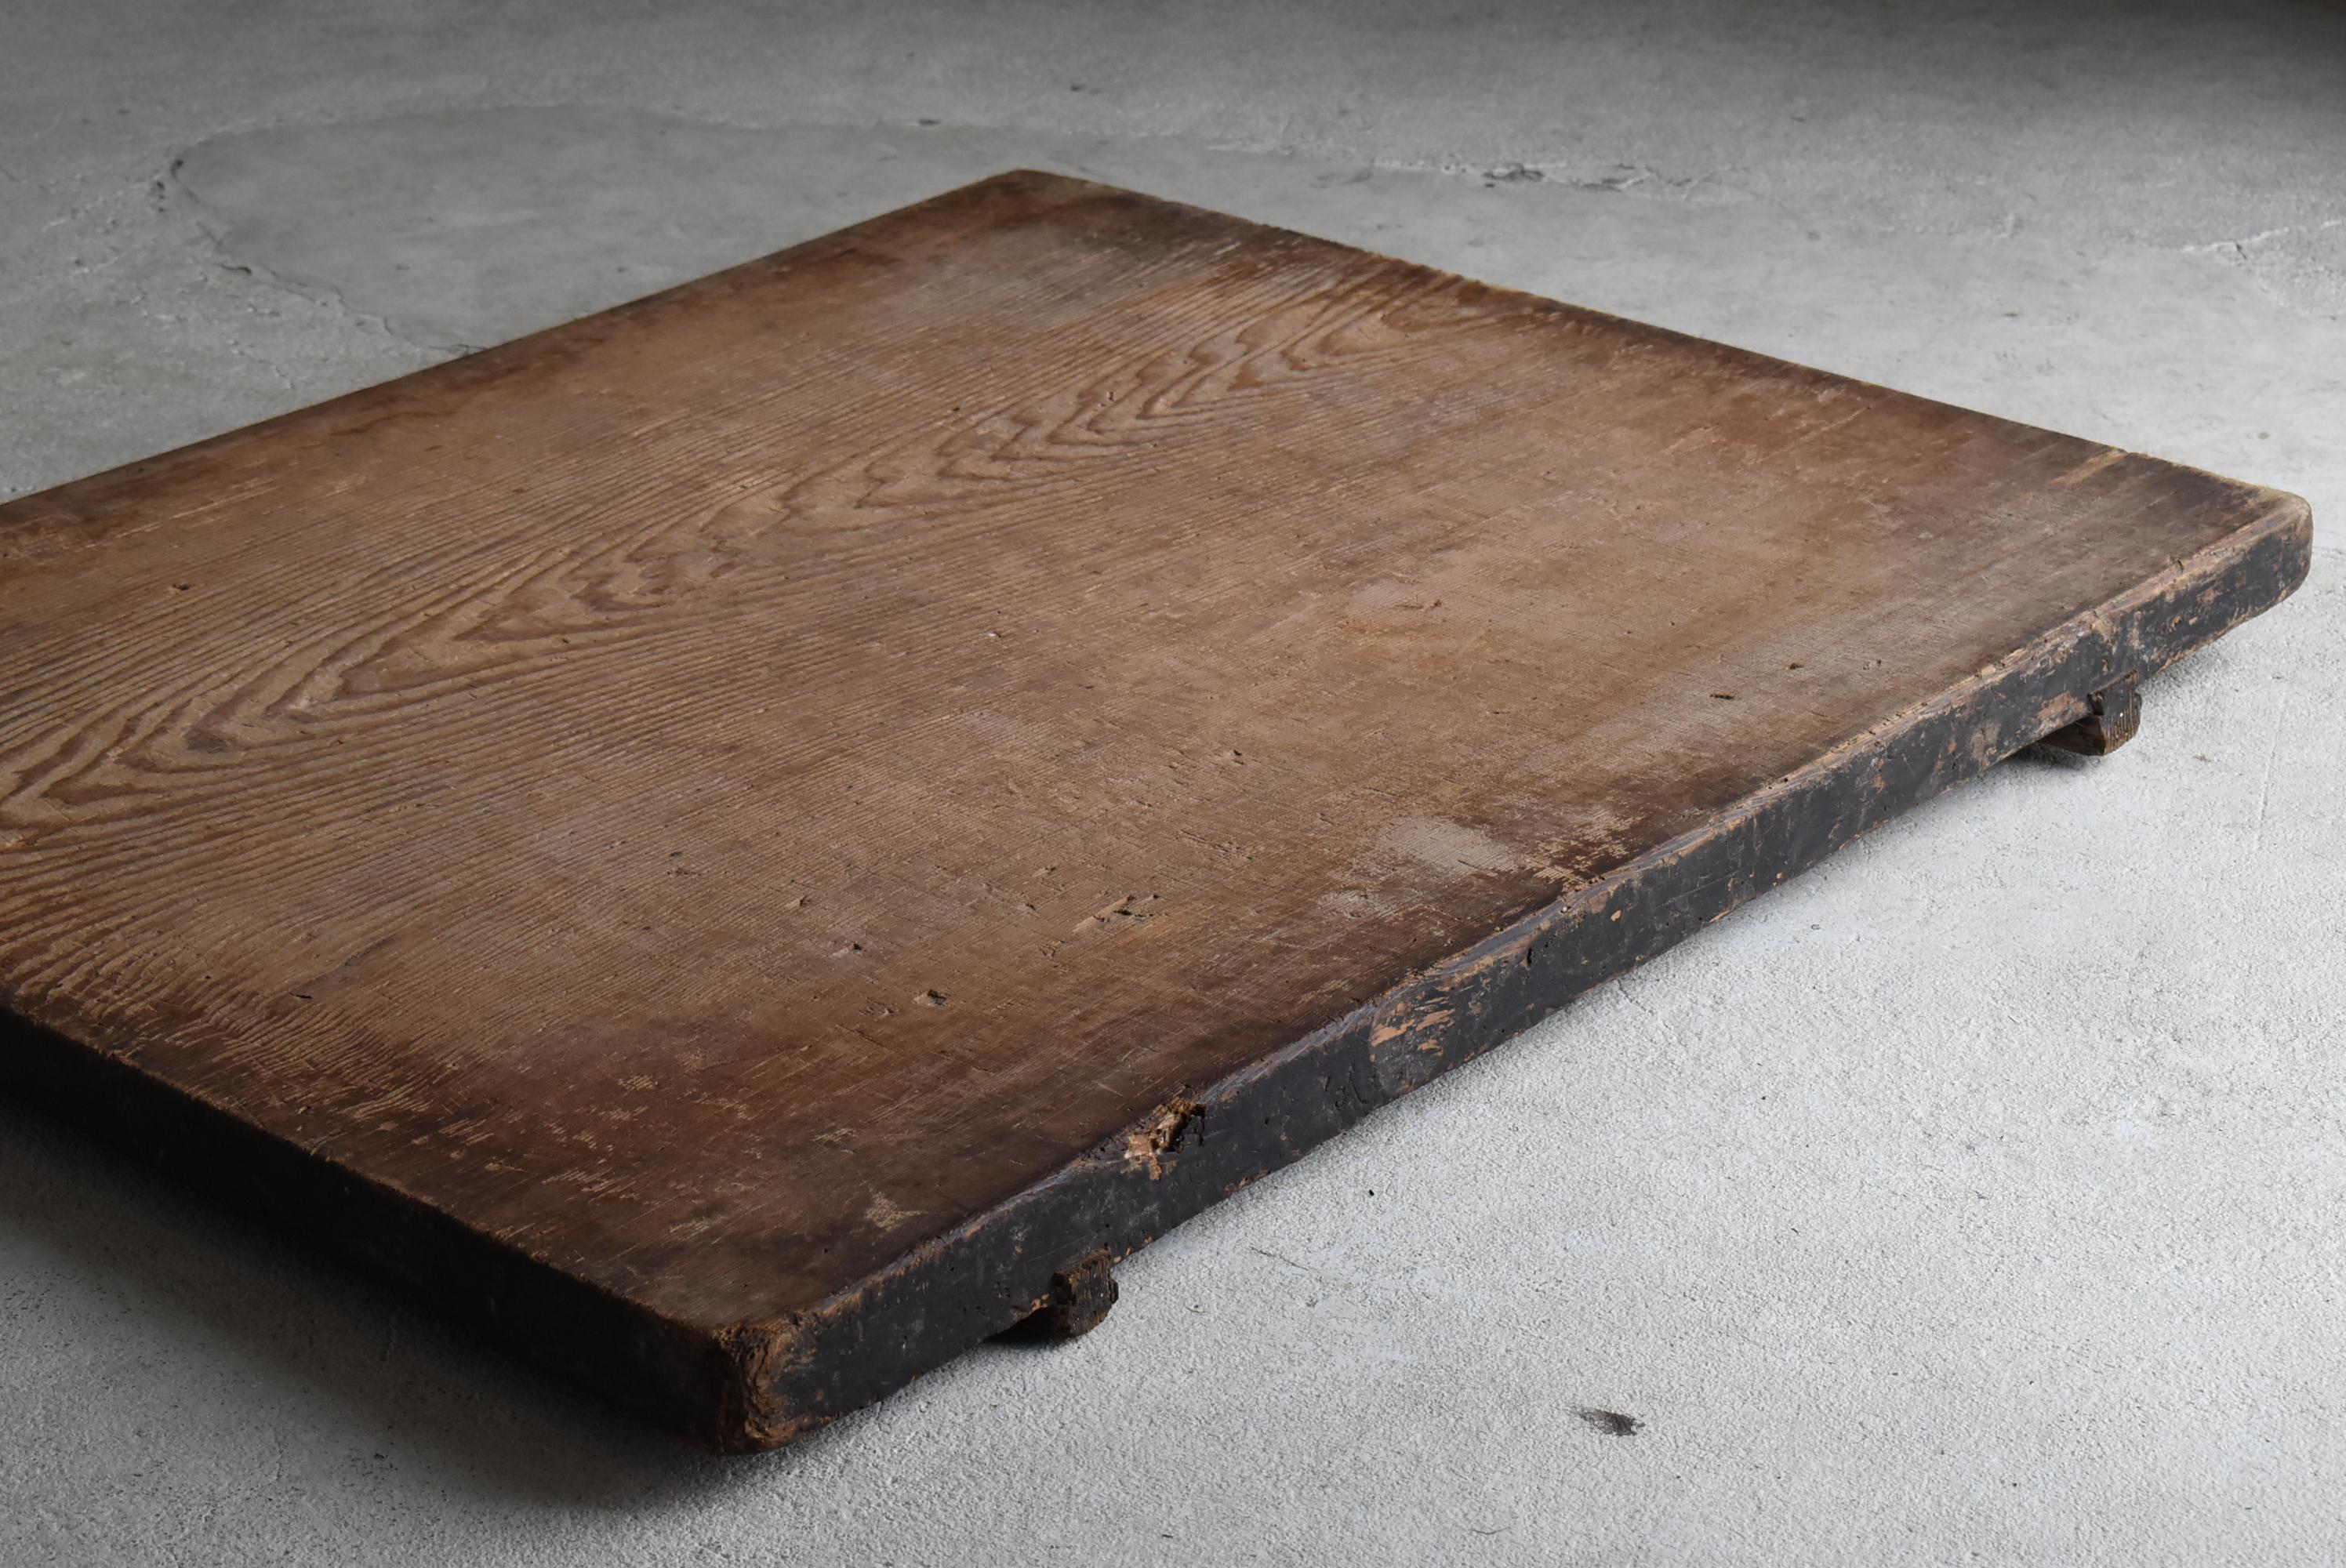 Japanese Antique Extra-Large Wooden board 1860s-1900s / Wabi Sabi Abstract Art 3